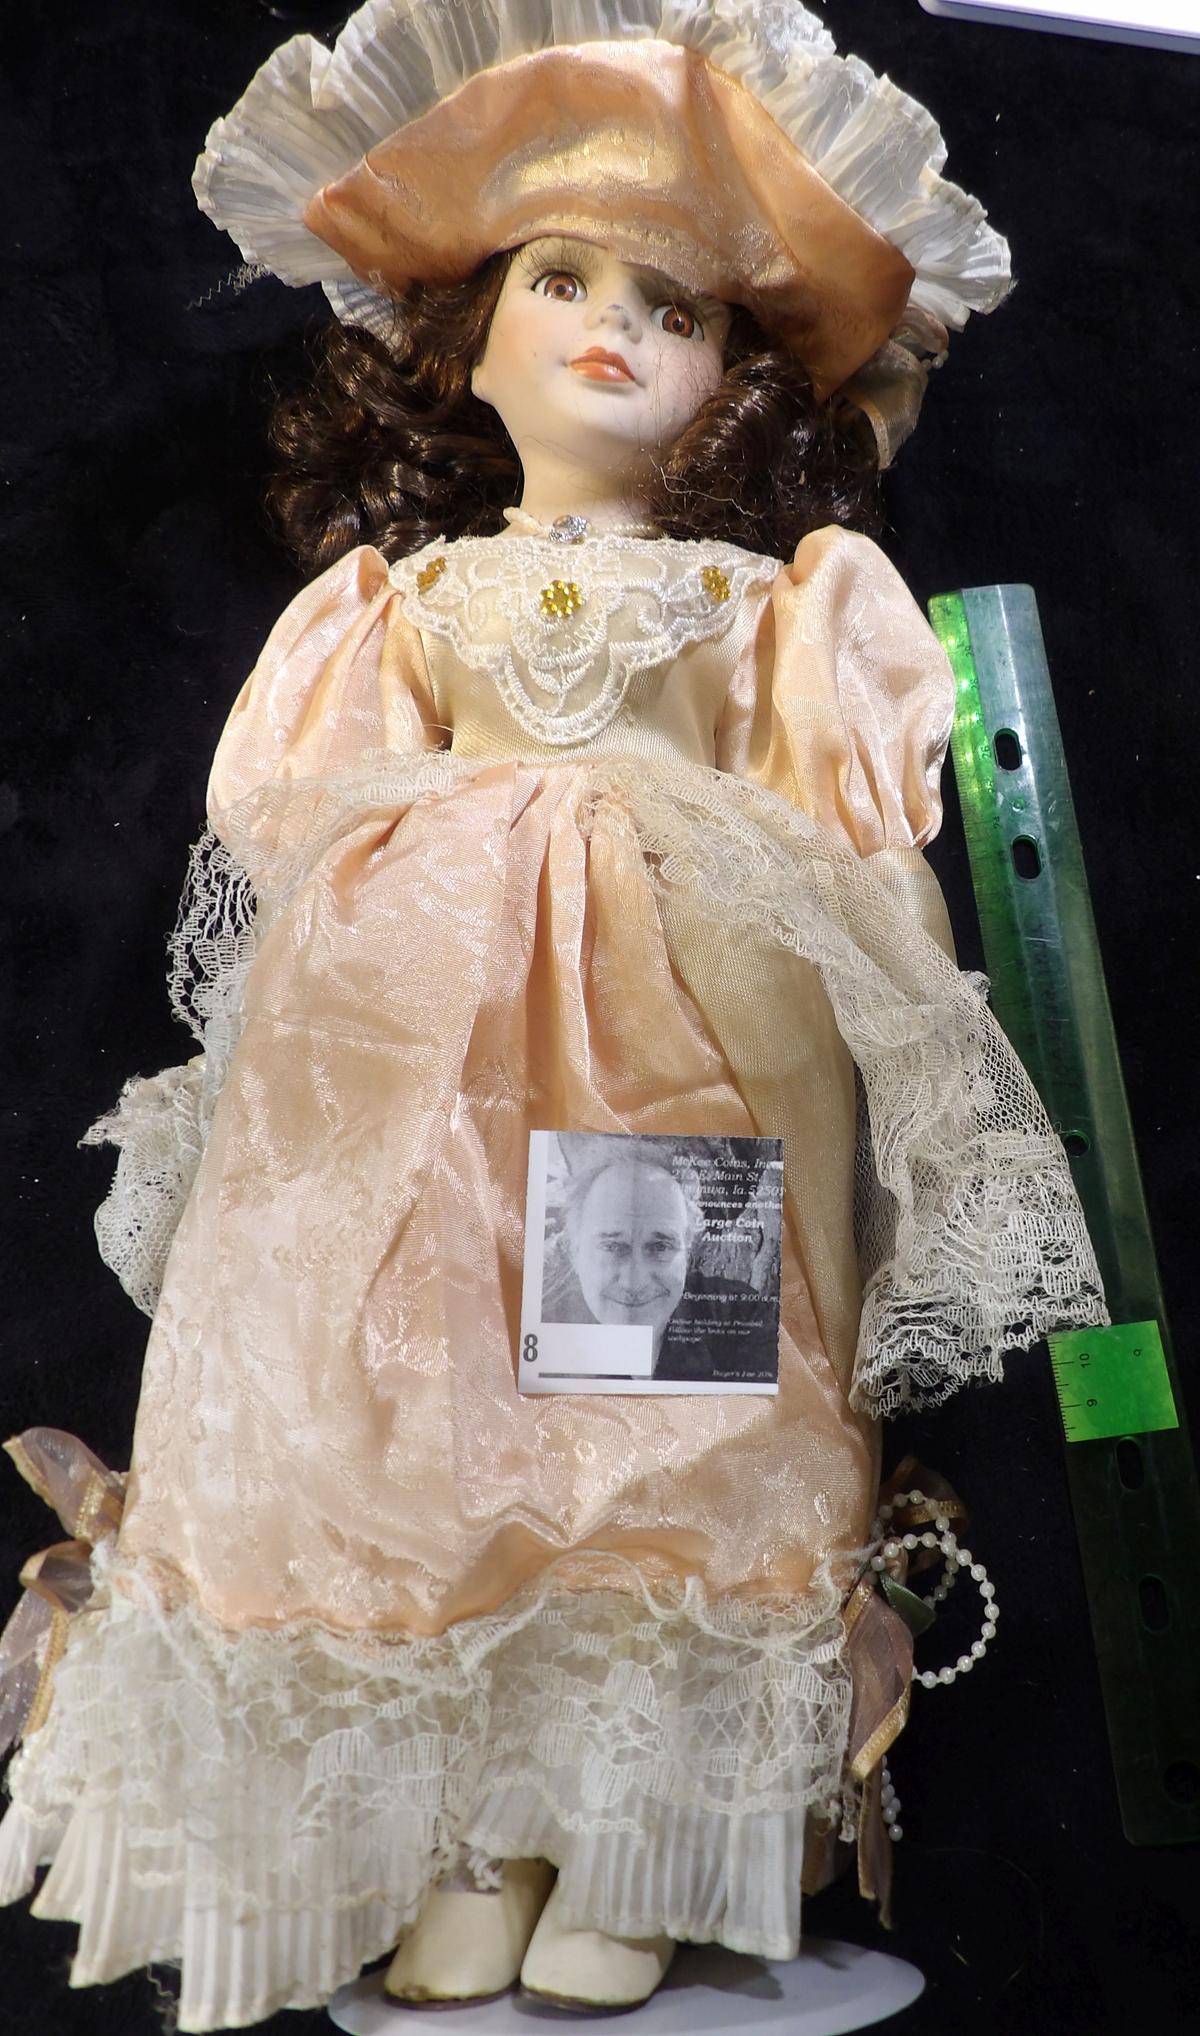 Lovely Brown-haired female Doll with lace Dress and hat, on stand. A little over 14" in height. Carr